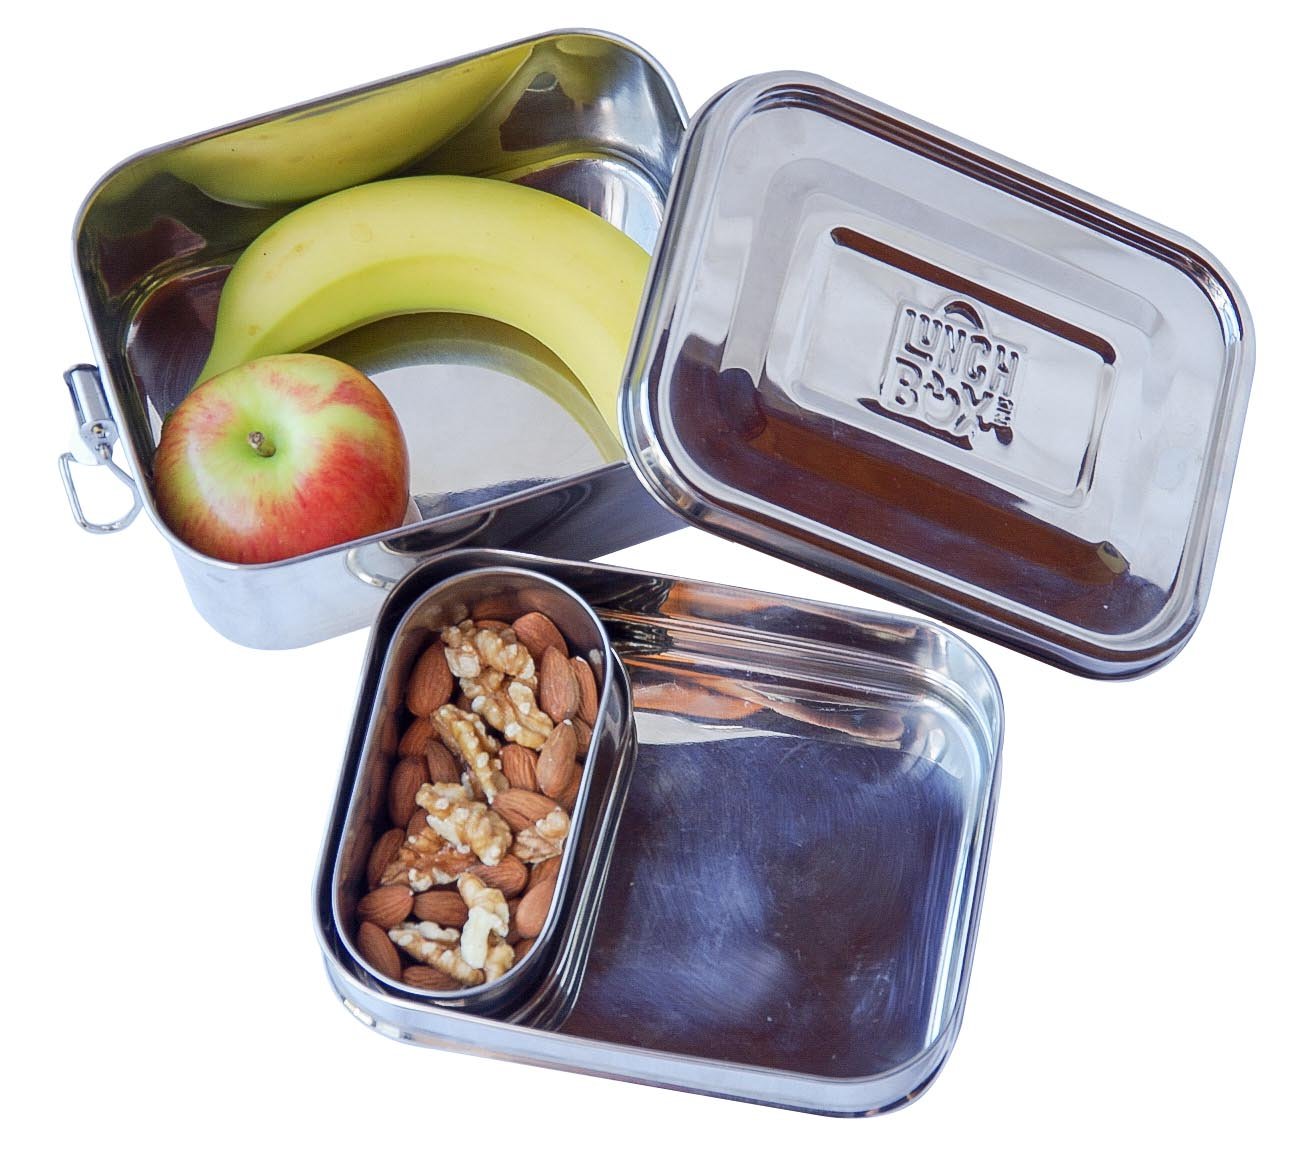 Wide Range Of Eco Friendly & Leakproof Bento Lunchboxes. Kiwi Design, Stainless Steel Lunch Box, Water Bottles and Insulated Lunch bags for School, Work & Day Trips. Shop for Planetbox, Omiebox, Goodbyn, Montii, Contigo, Meals In Steel, Packit and more